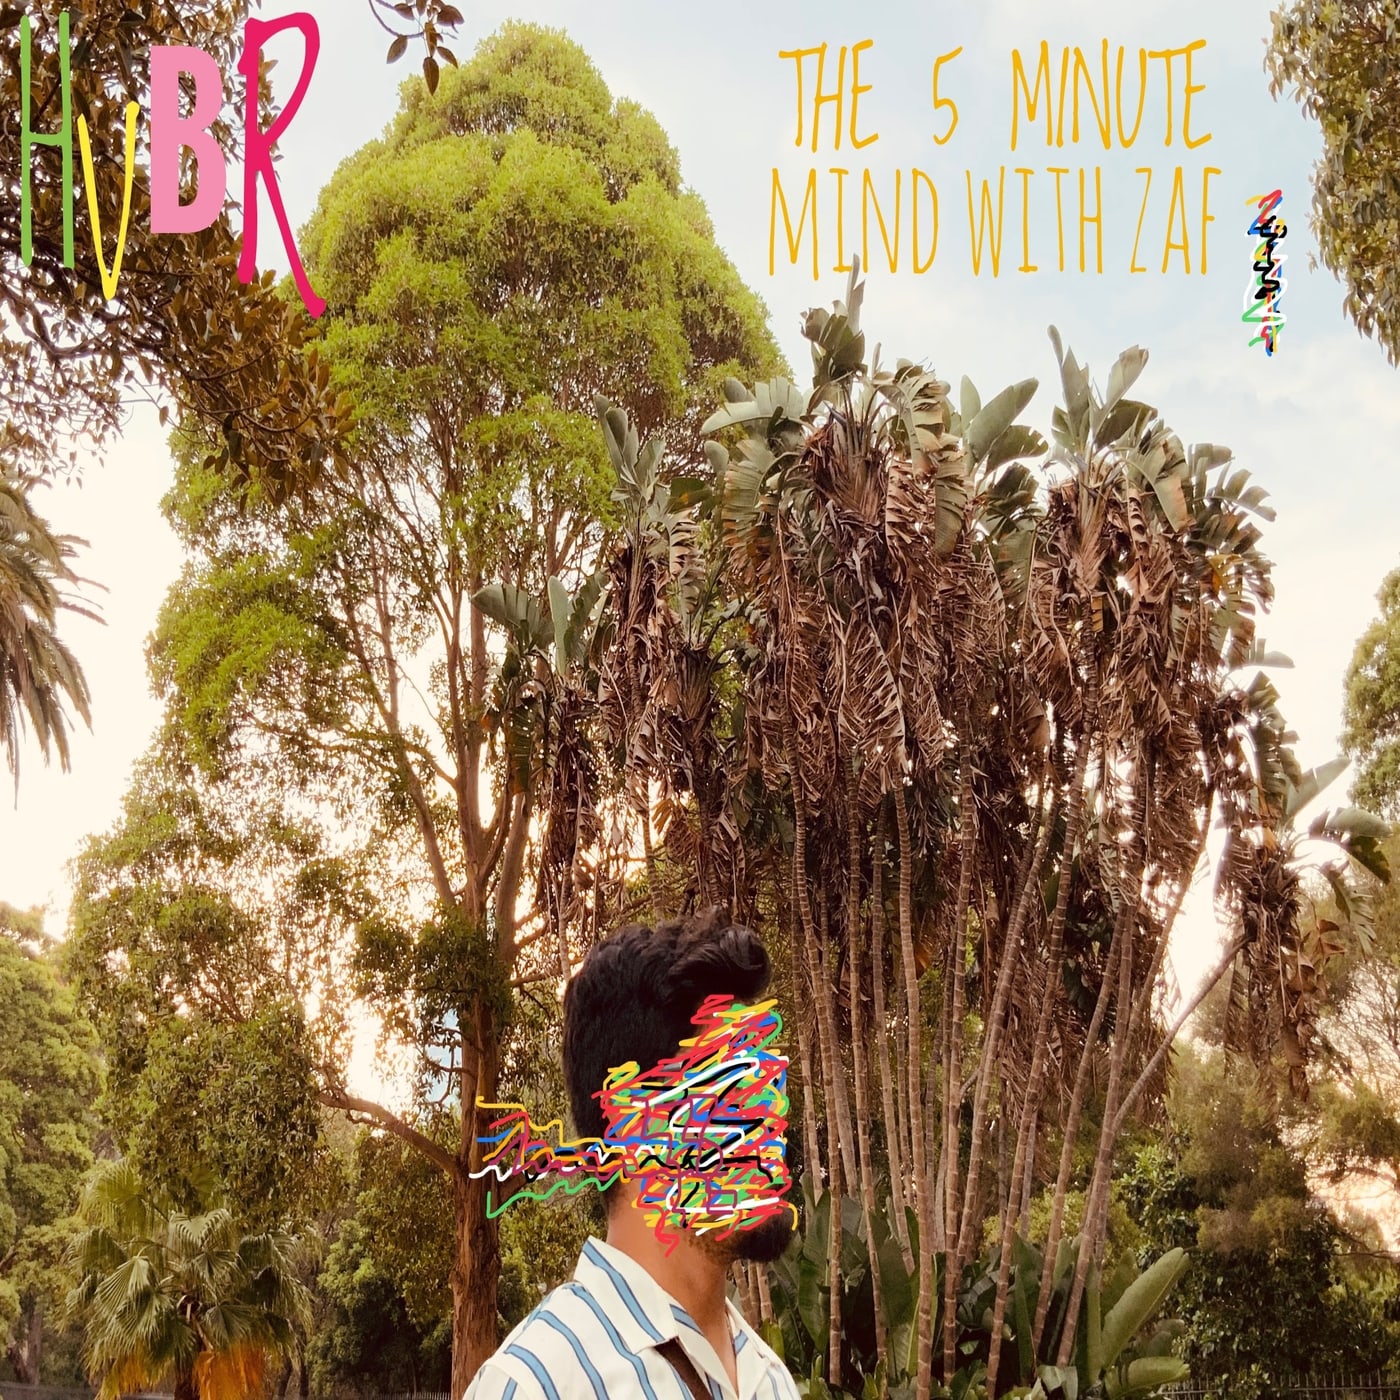 Artwork for THE 5 MINUTE MIND WITH ZAF